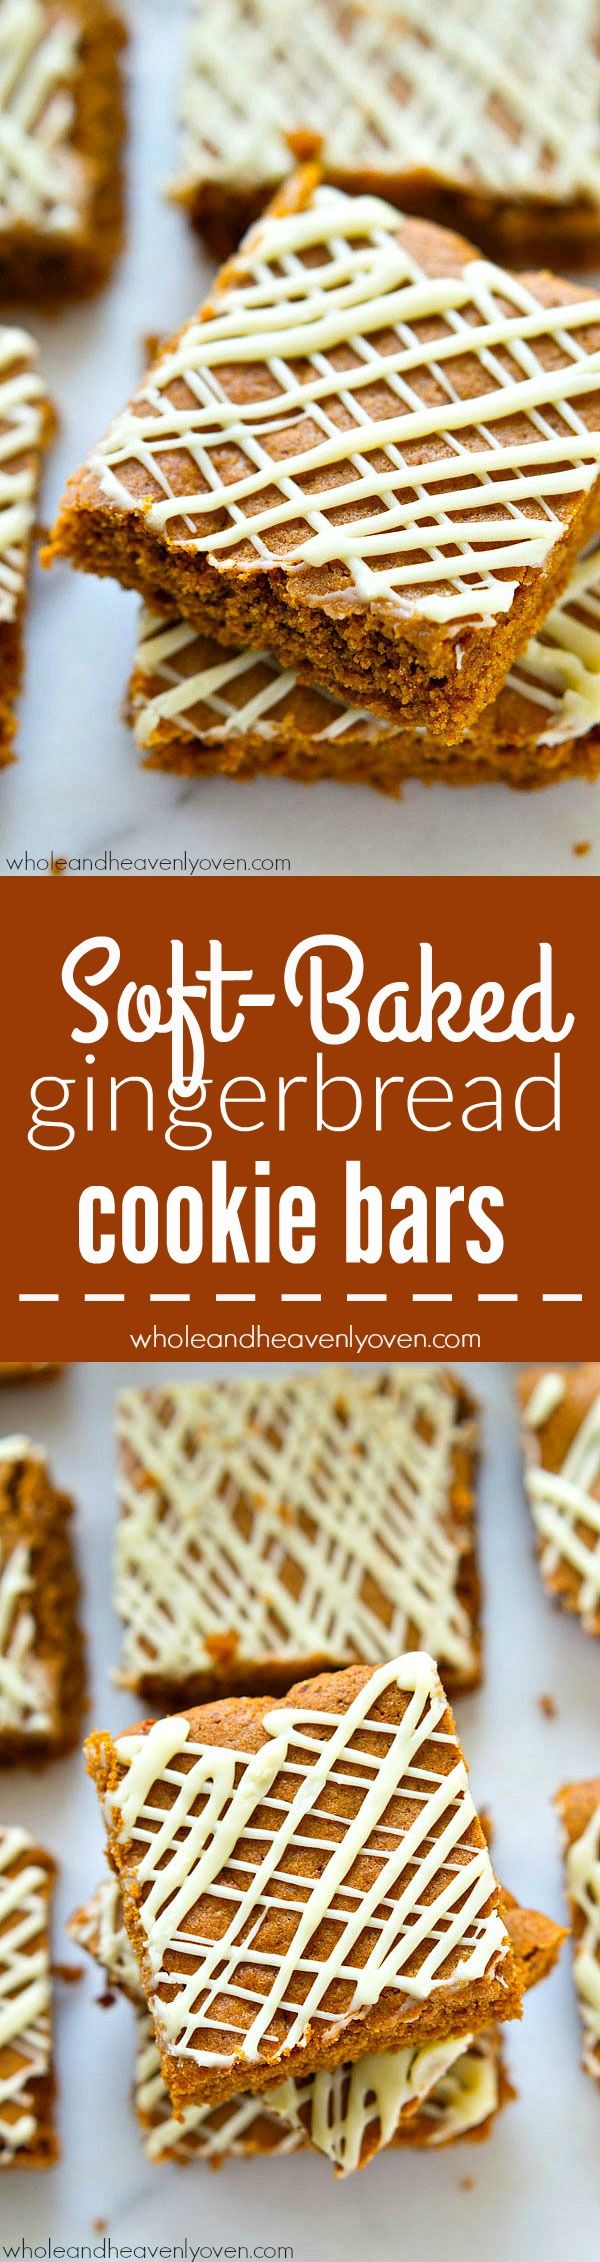 Soft-Baked Gingerbread Cookie Bars